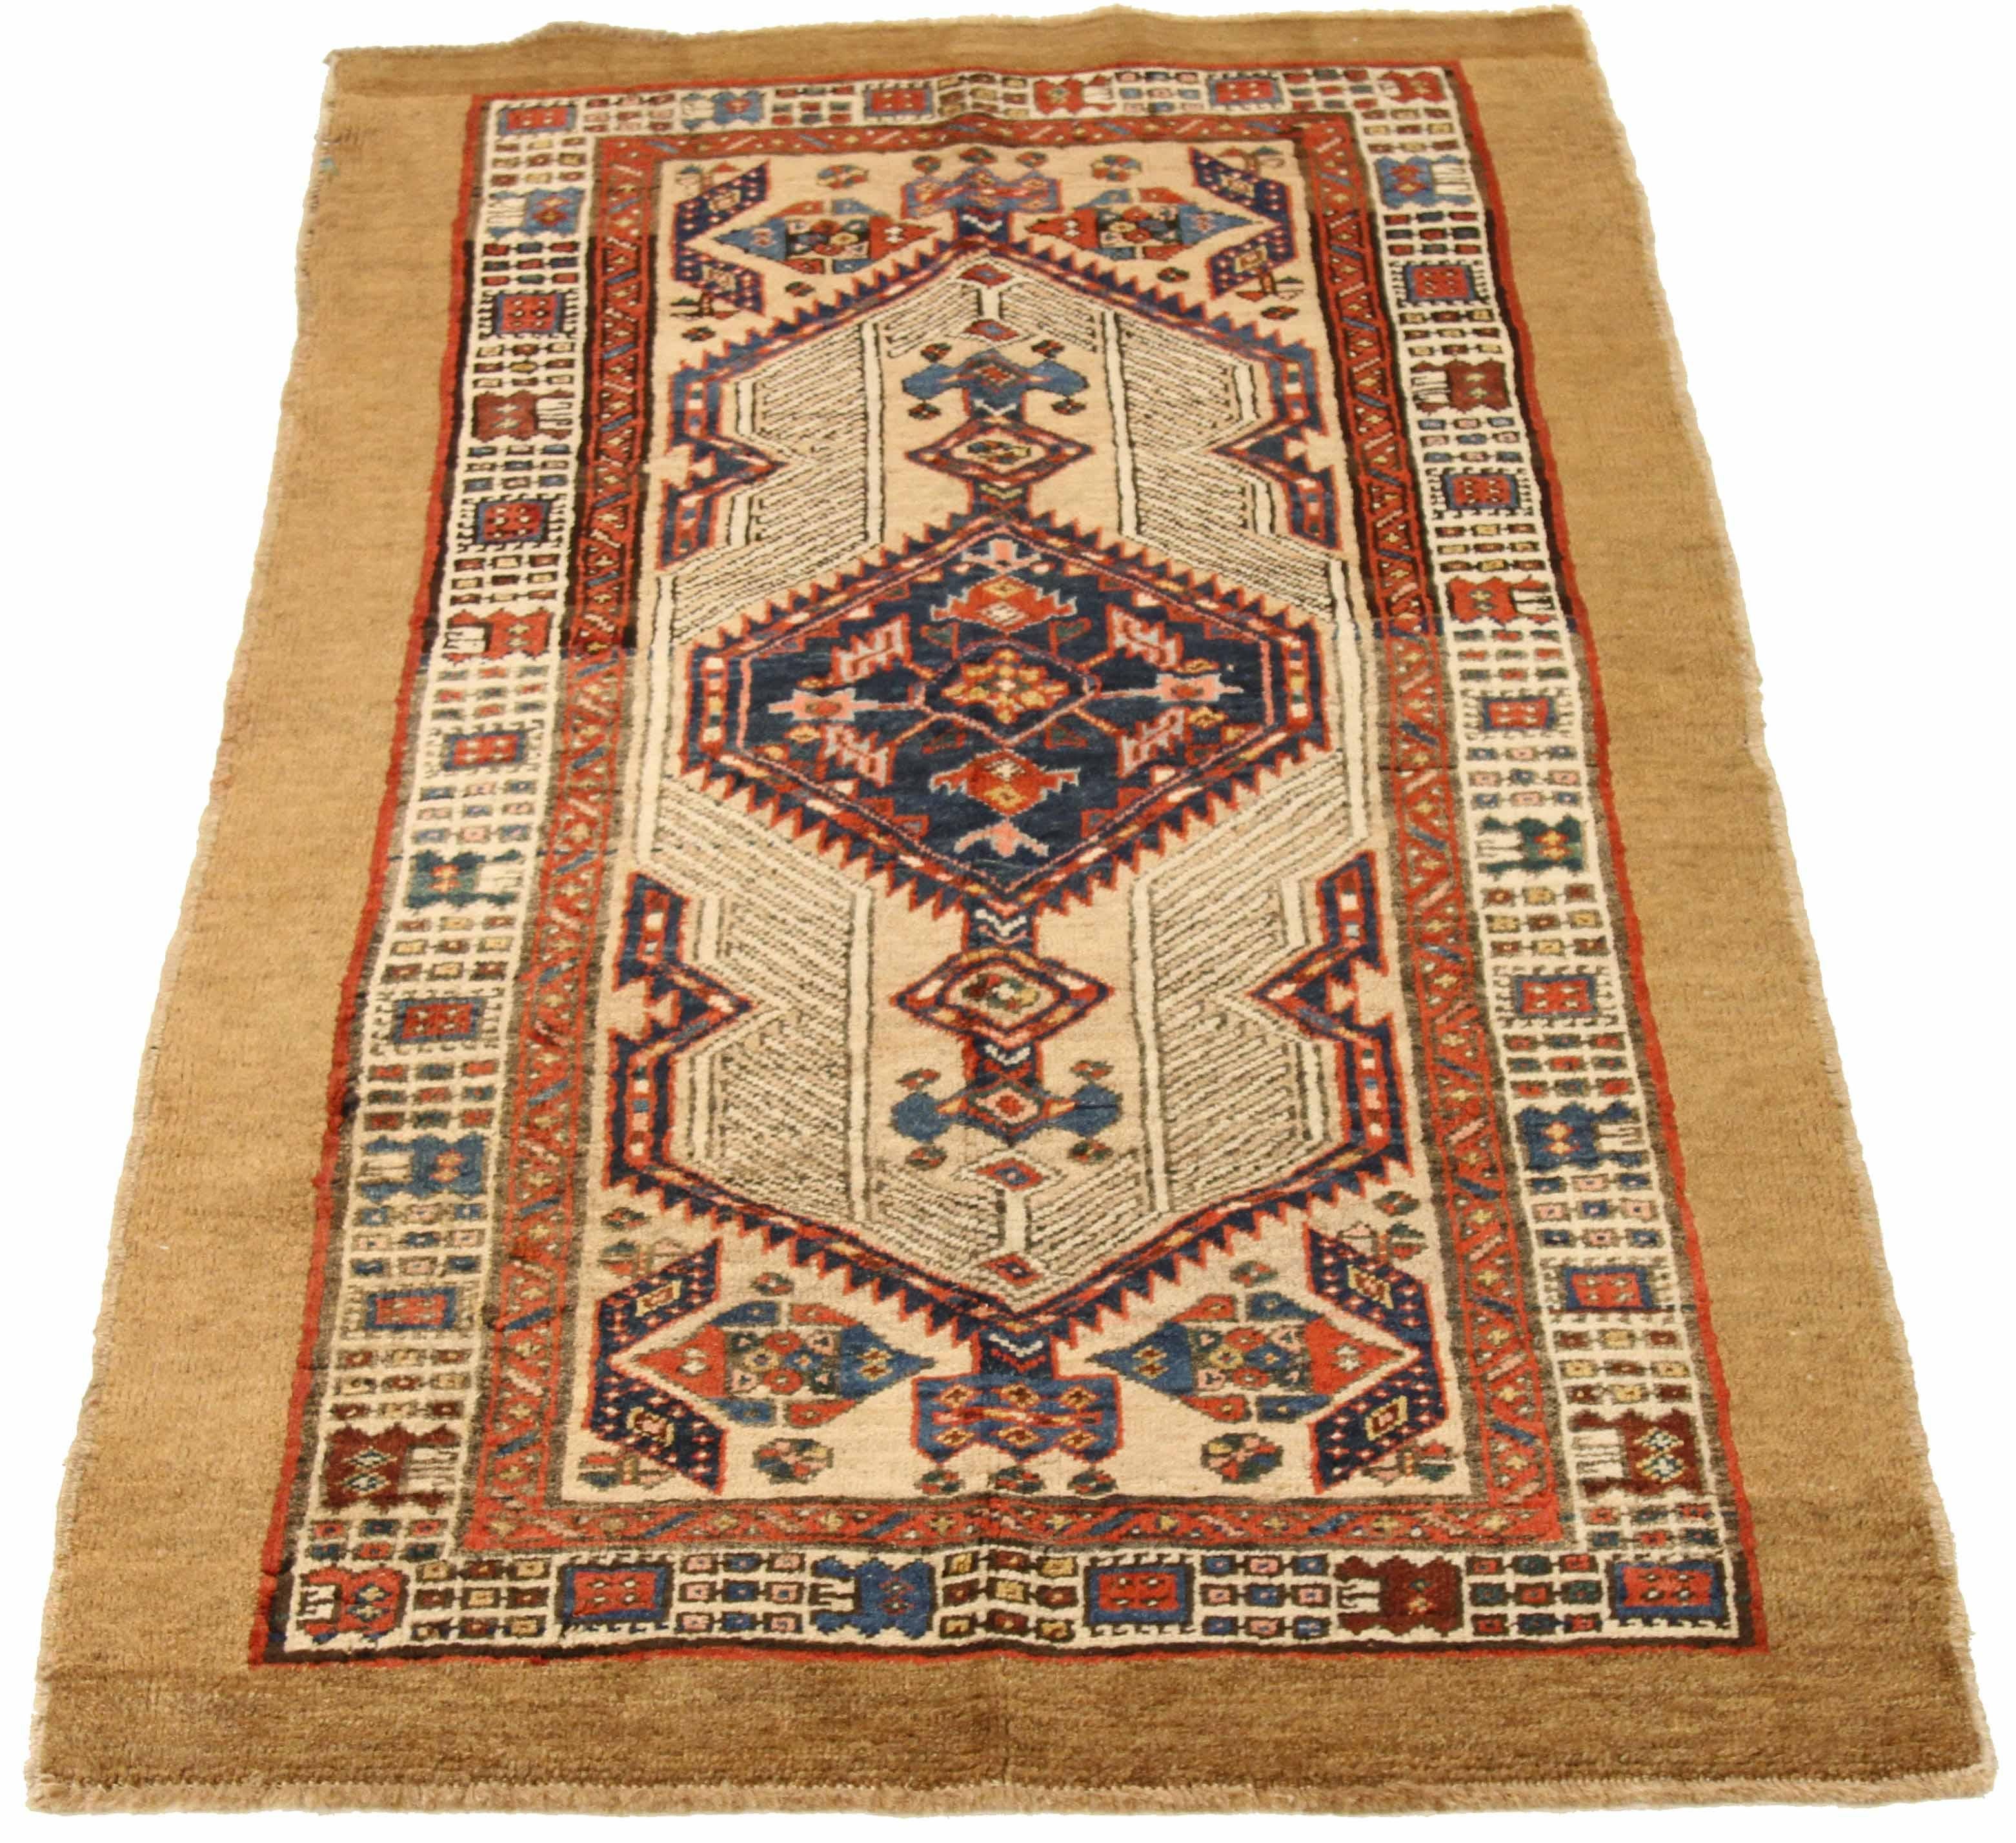 Antique Persian area rug handwoven from the finest sheep’s wool. It’s colored with all-natural vegetable dyes that are safe for humans and pets. It’s a traditional Sarab design handwoven by expert artisans. It’s a lovely area rug that can be